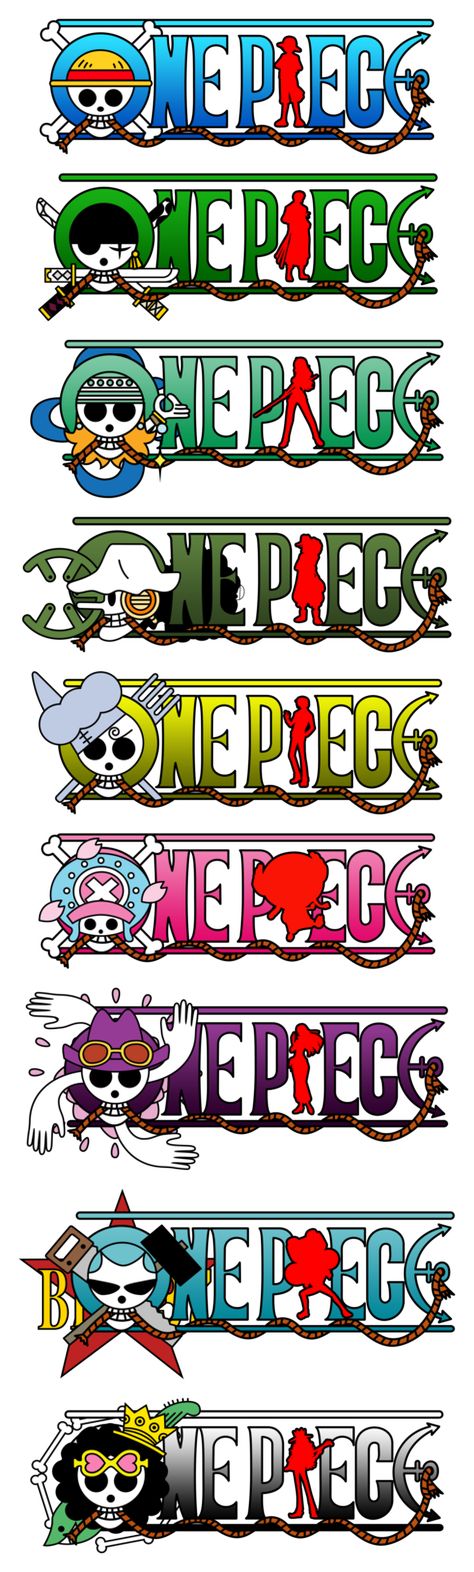 One Piece anime car sticker 3 styles price for a set of 9 pcs